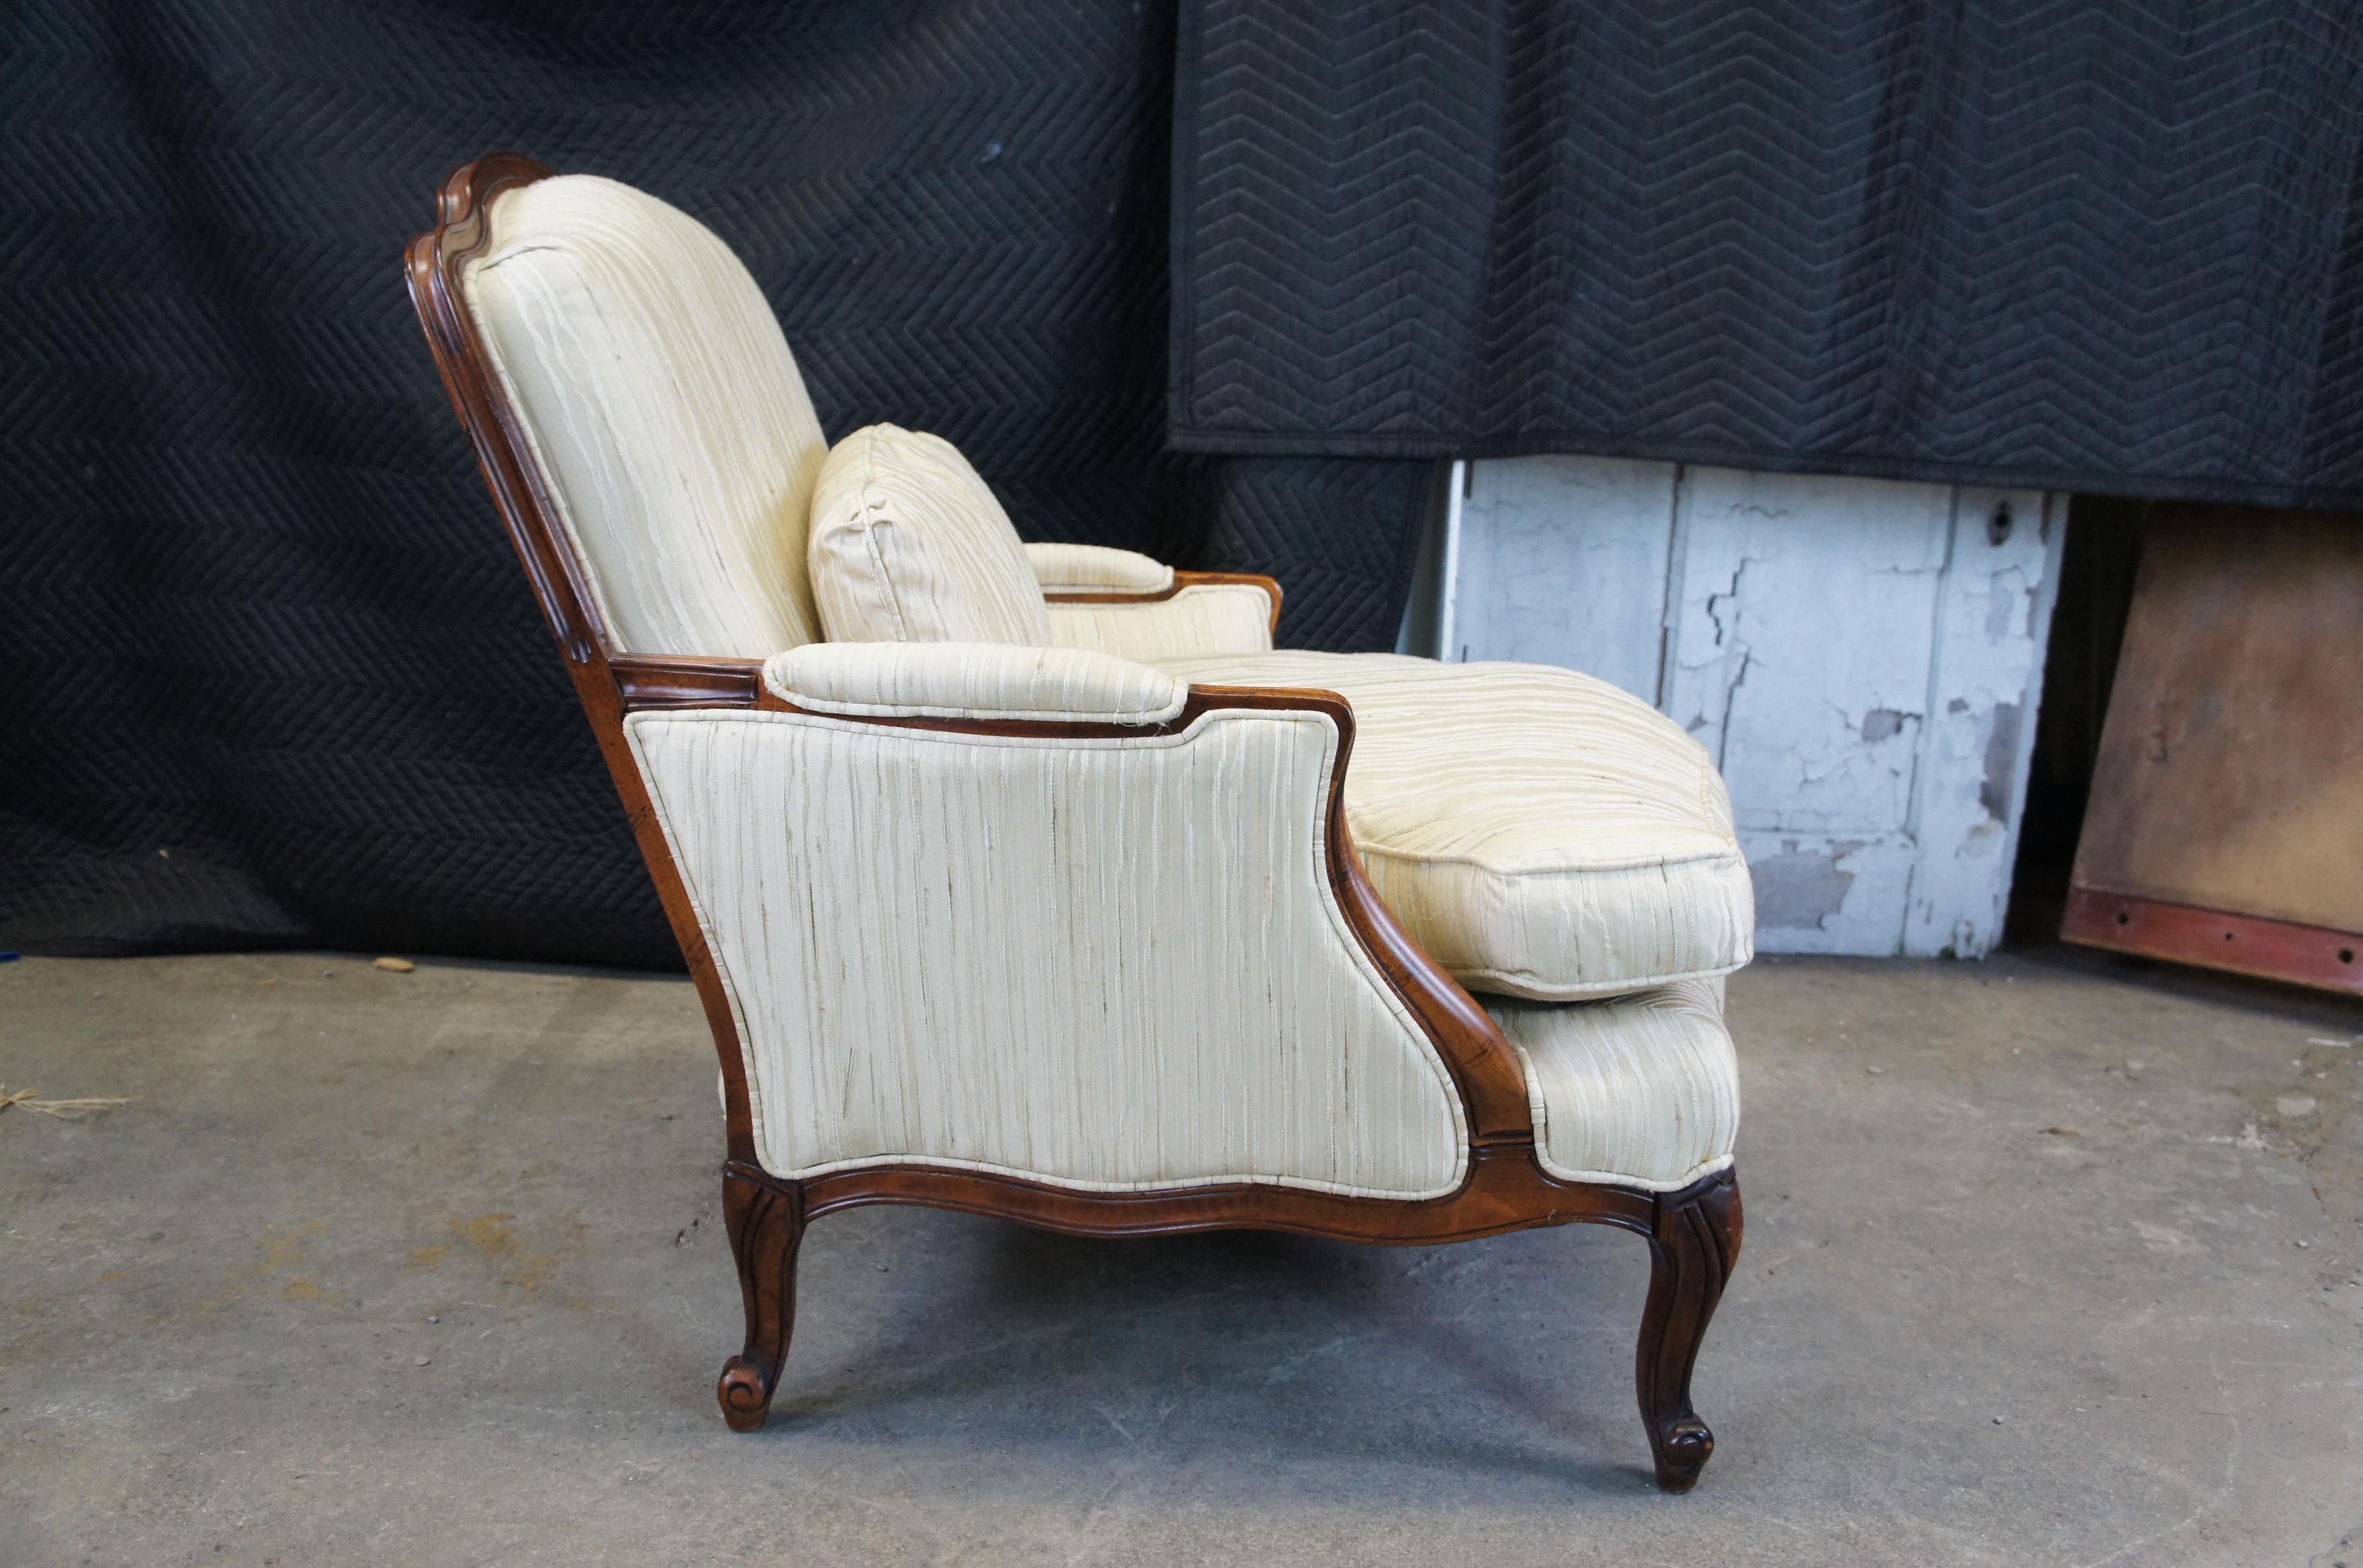 French Provincial Sam Moore French Country Walnut Bergere Fauteuil Club Lounge Arm Chair Ottoman